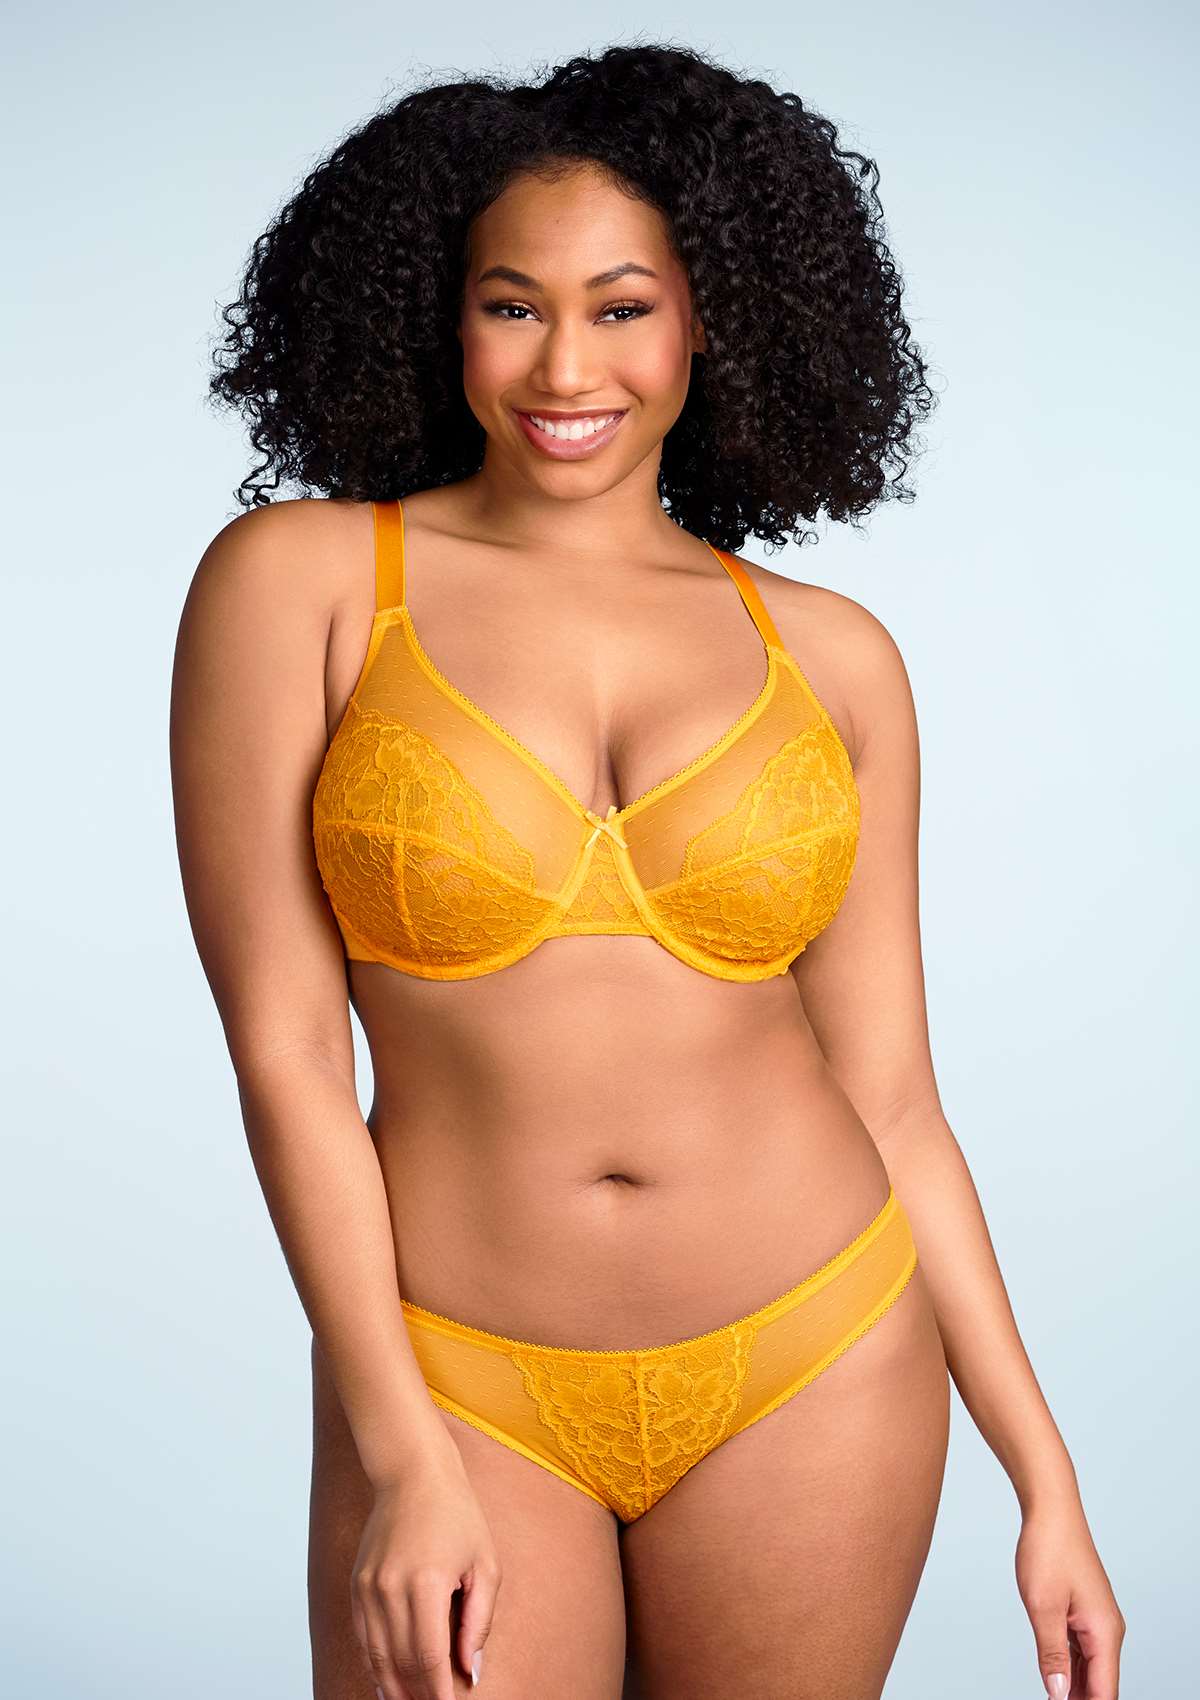 HSIA Enchante Bra And Panty Sets: Unpadded Bra With Back Support - Cadmium Yellow / 42 / G